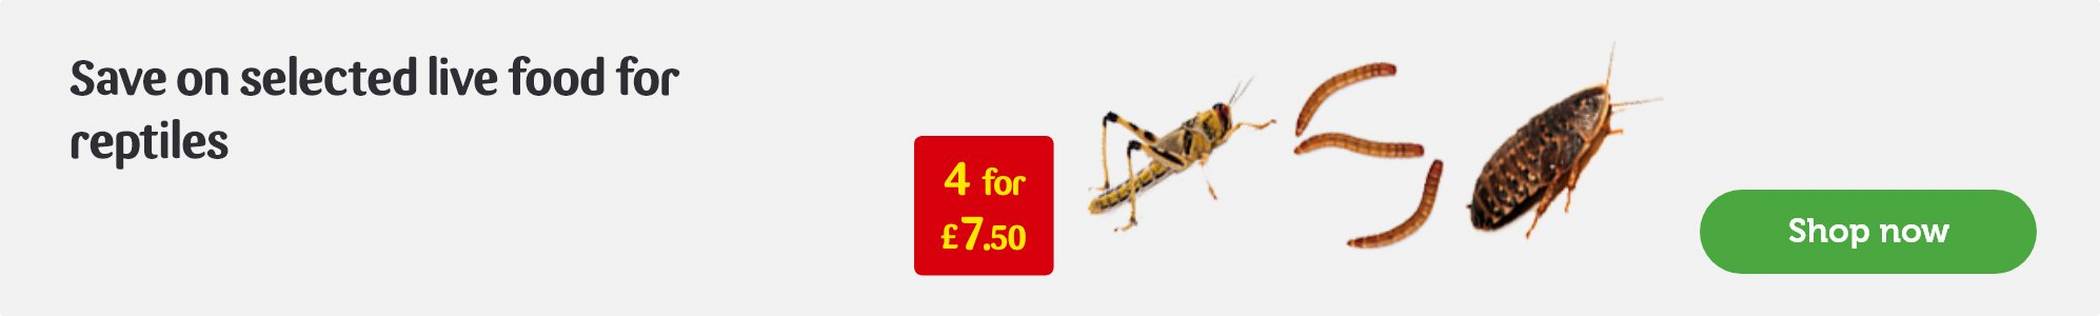 Save on selected live food for reptiles